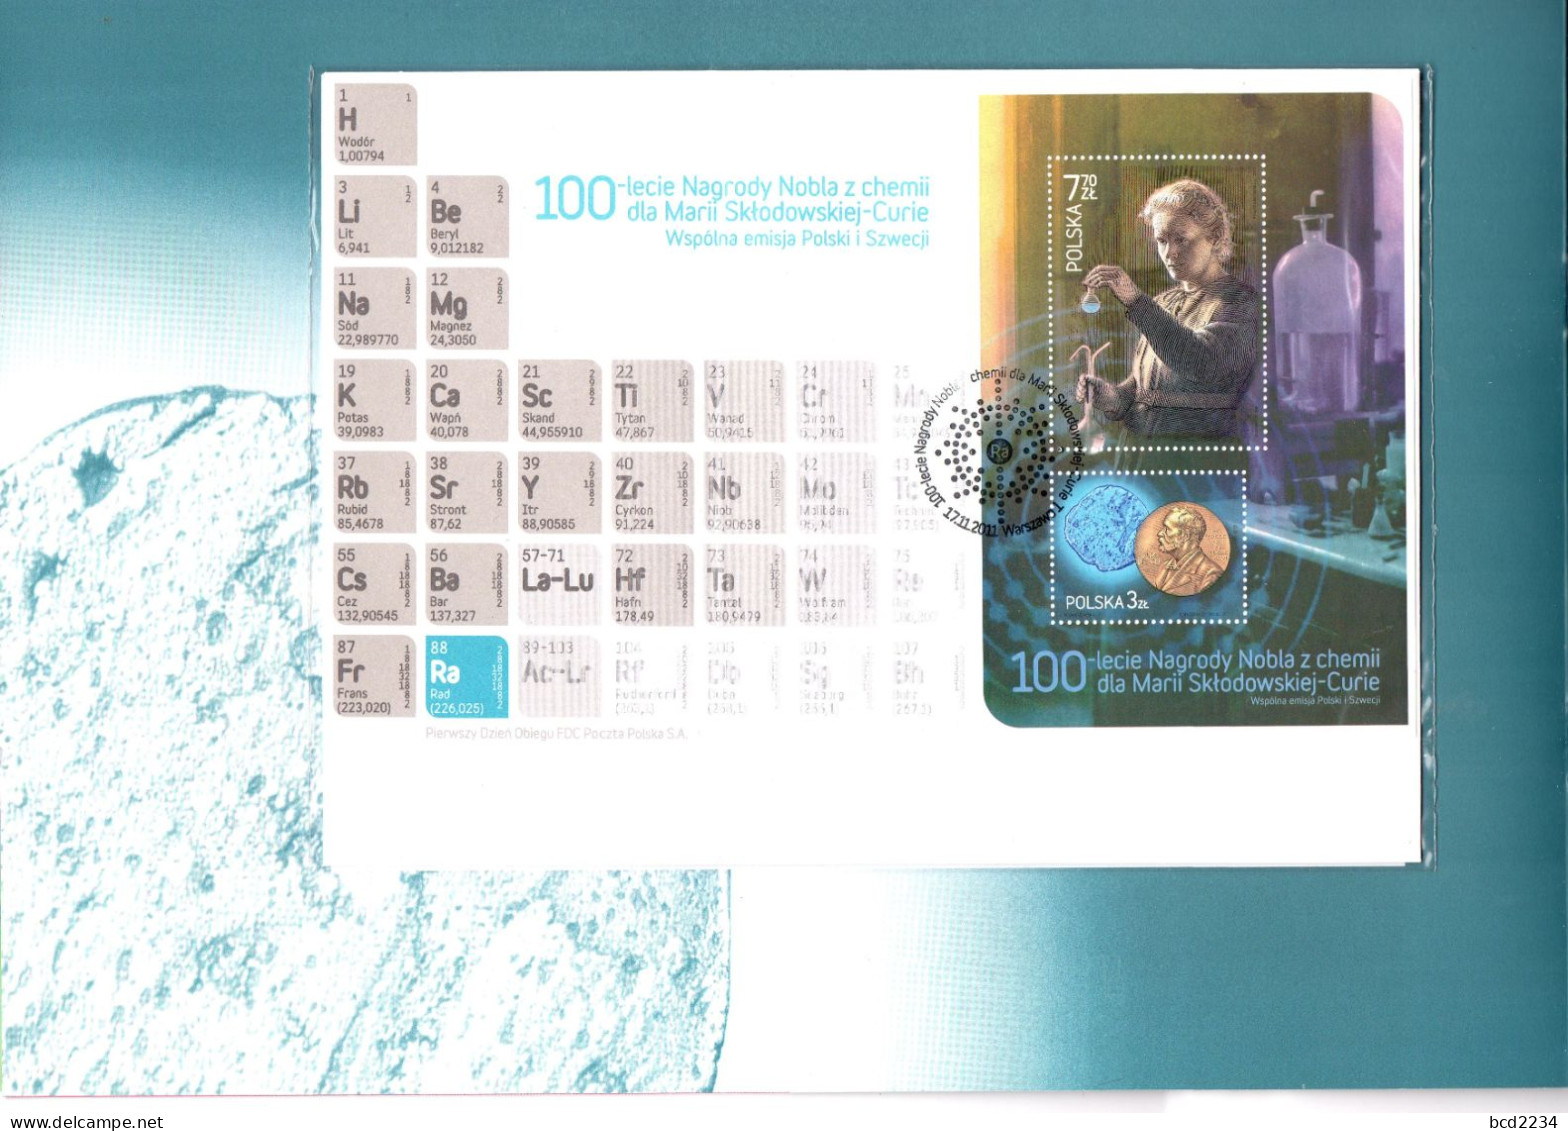 POLAND 2011 LIMITED EDITION: RARE 100TH ANNIVERSARY MARIE CURIE NOBEL PRIZE CHEMISTRY FOLDER FDC MS PL SWEDEN - Scheikunde